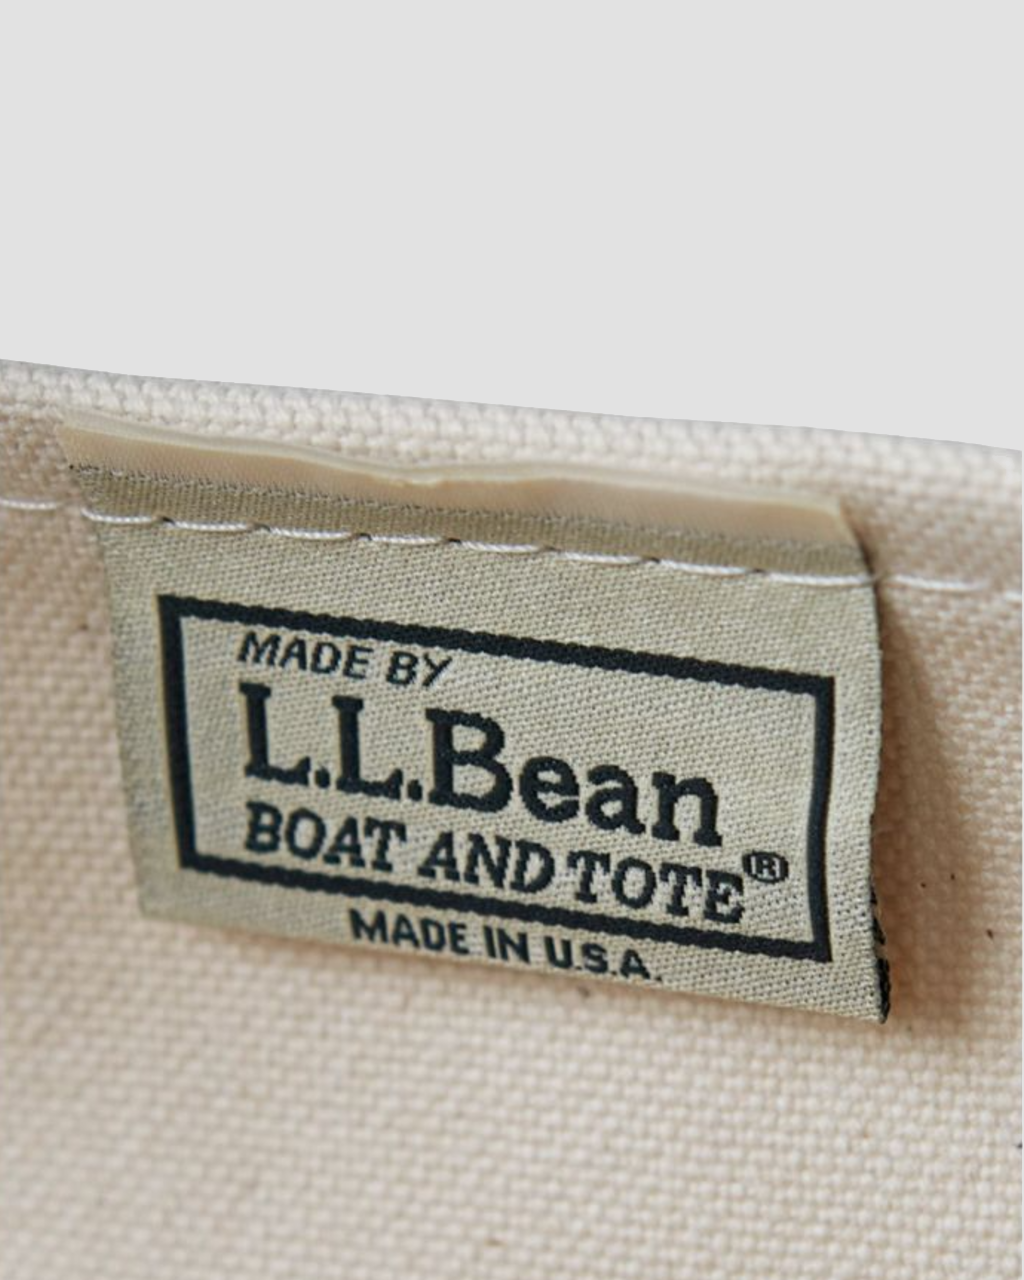 Pin on L.L.Bean Boat and Totes